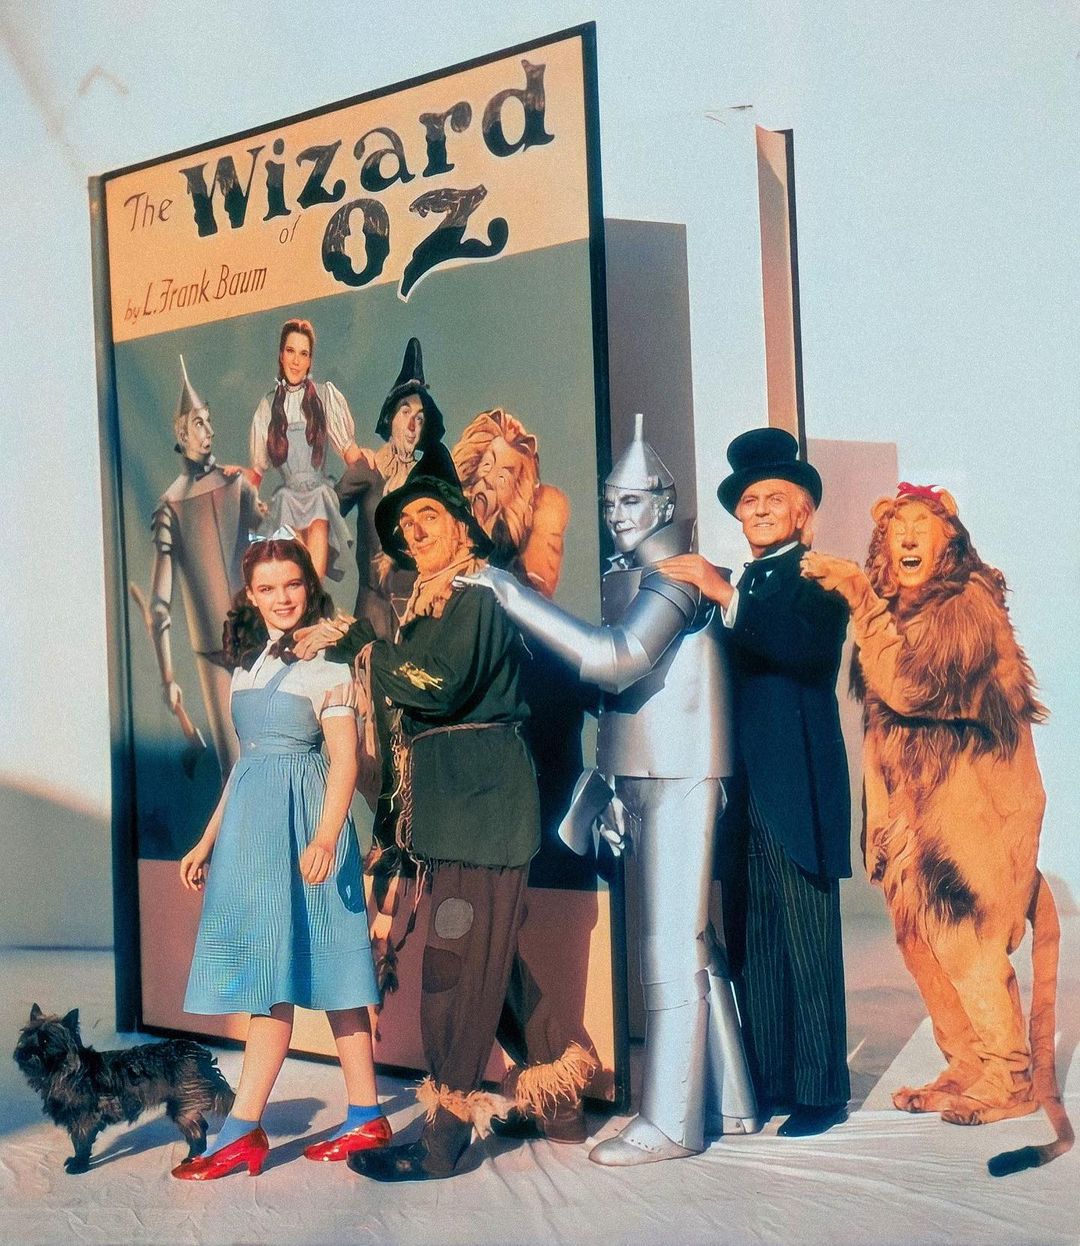 The cast of The Wizard of Oz, where Garland plays Dorothy